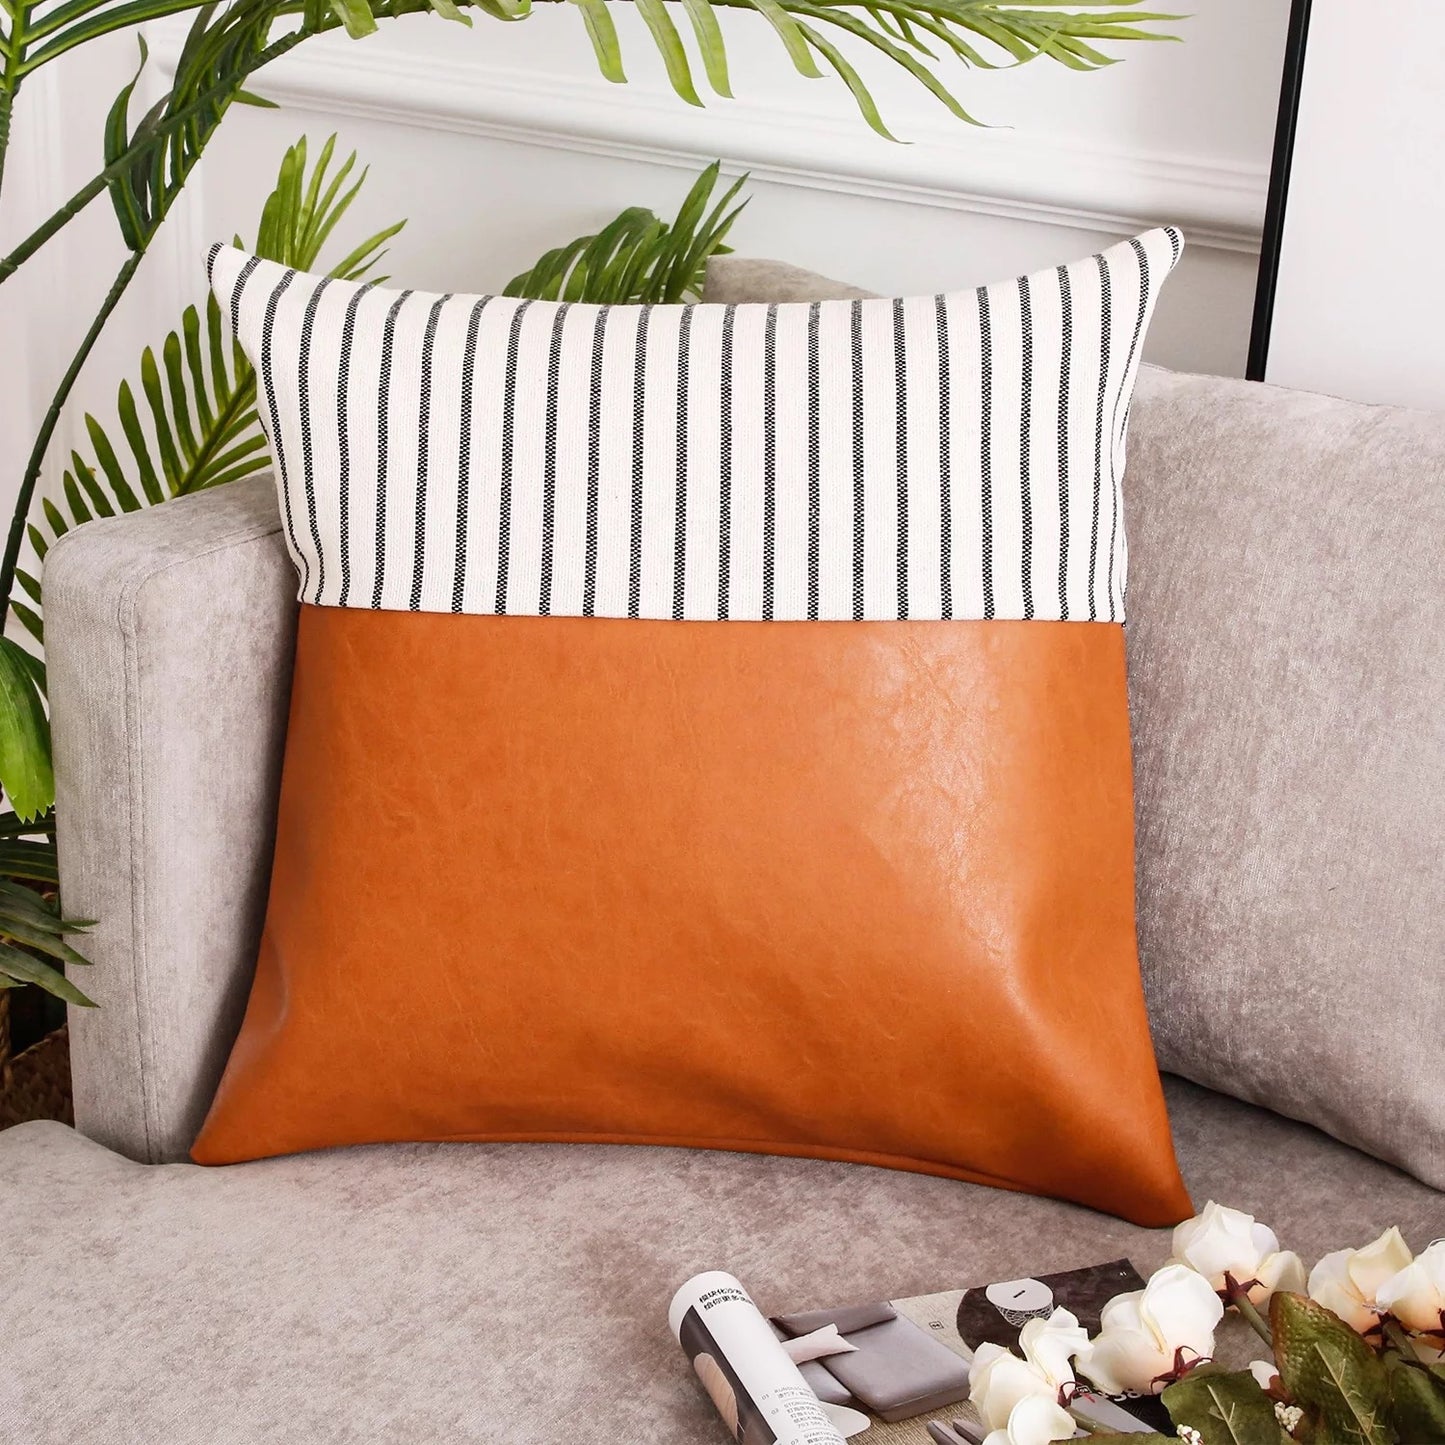 Stripe/PU Leather Throw Pillow Cover